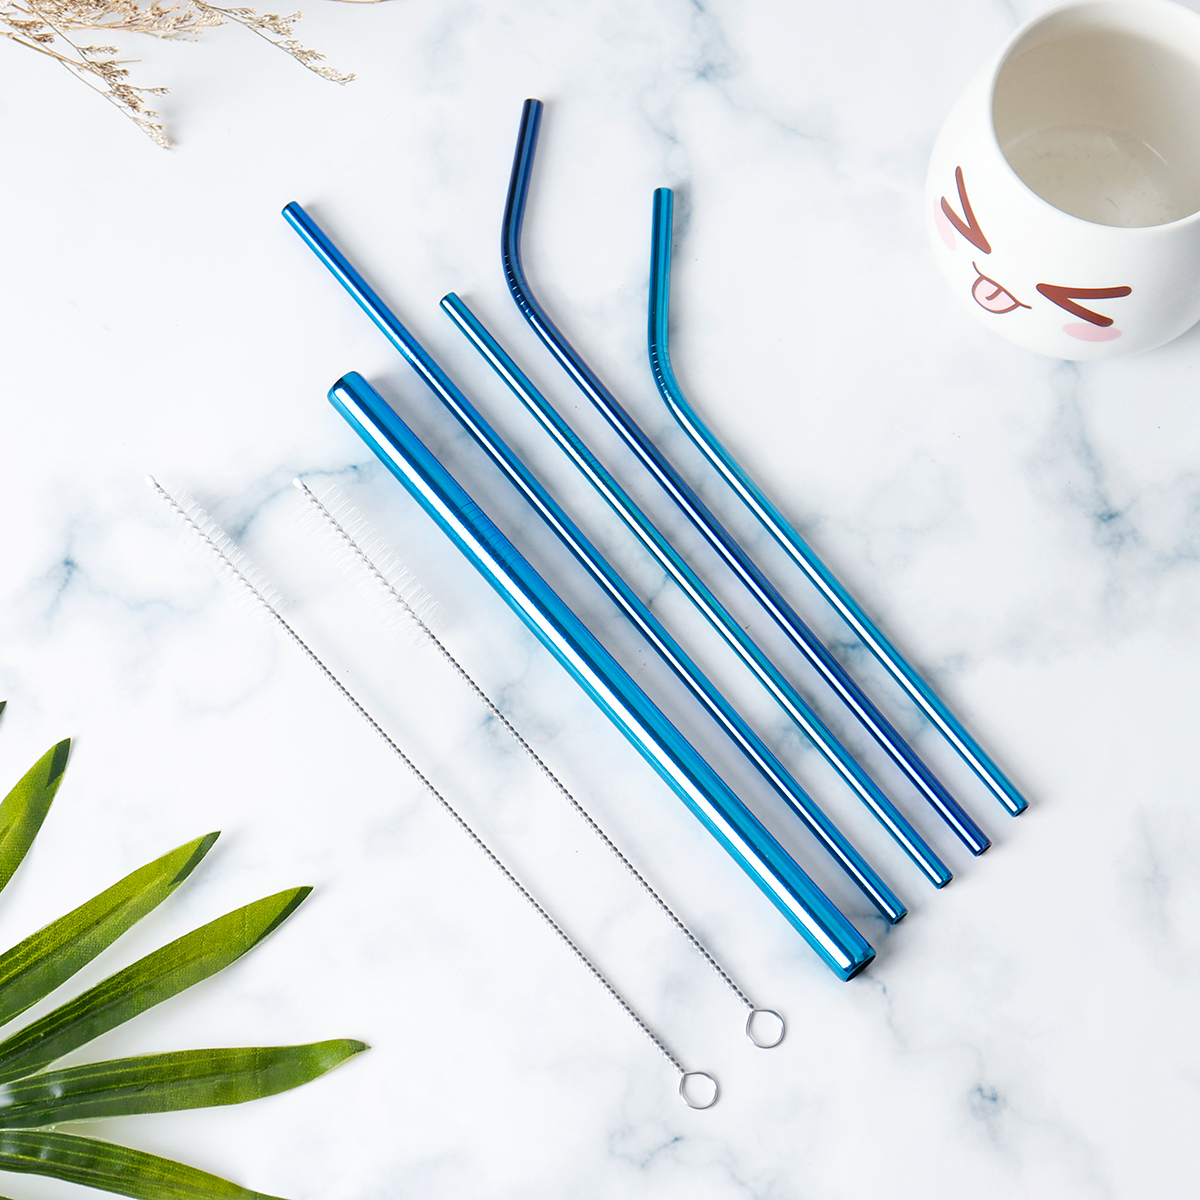 Portable-Metal-Straw-Set-304-Stainless-Steel-Straws-Reusable-Metal-Drinking-Straws-With-Cleaning-Bru-1532046-2